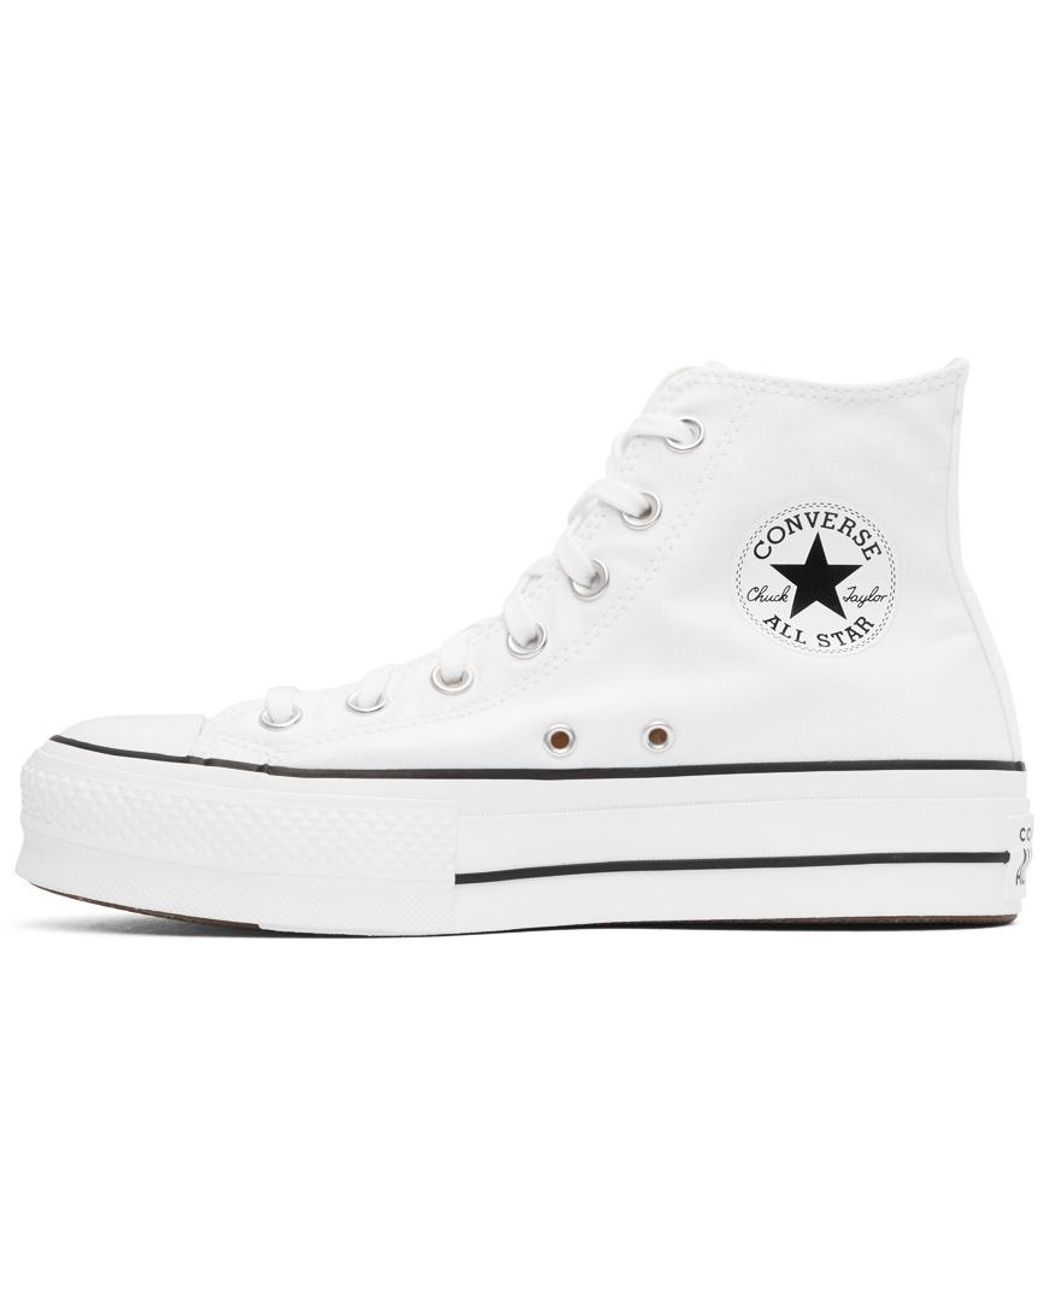 Converse Canvas Chuck Taylor All Star Lift Platform High Sneakers in White /Black/White (White) for Men - Save 7% - Lyst